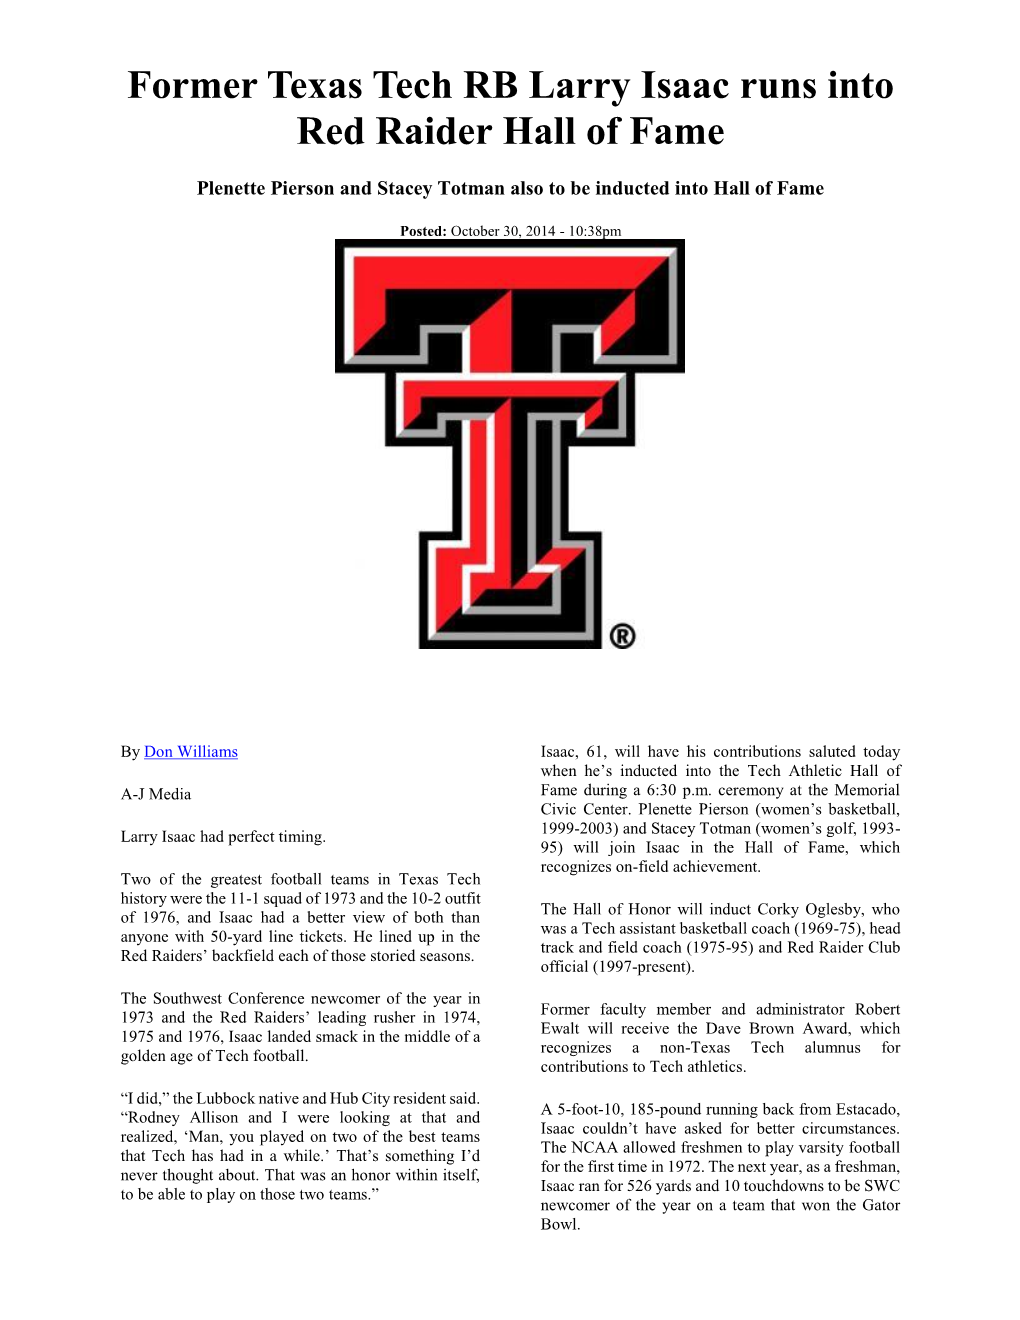 Former Texas Tech RB Larry Isaac Runs Into Red Raider Hall of Fame